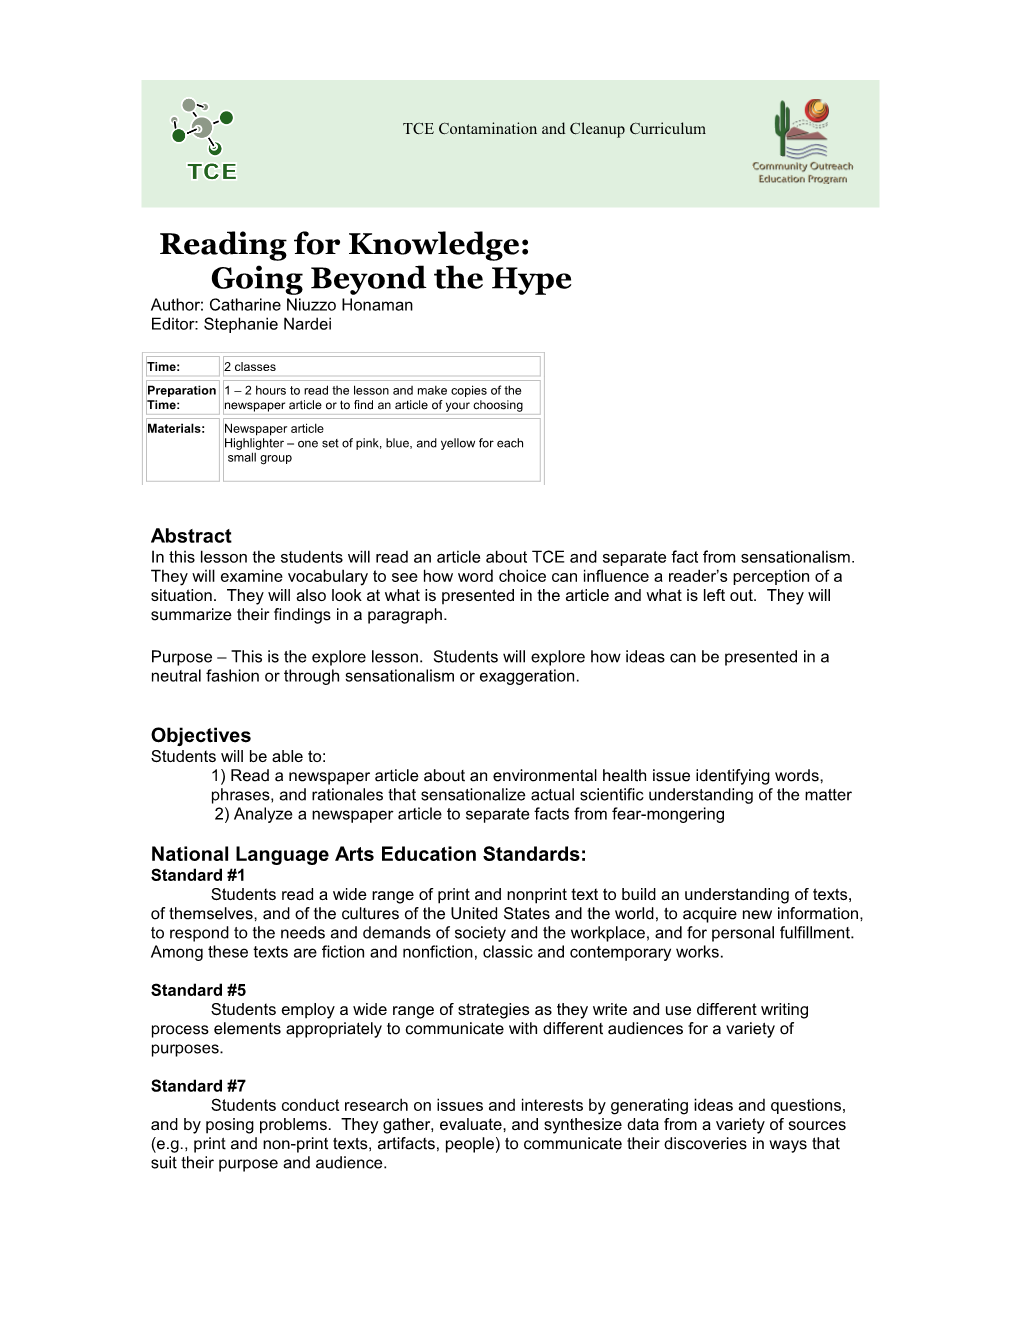 Reading for Knowledge